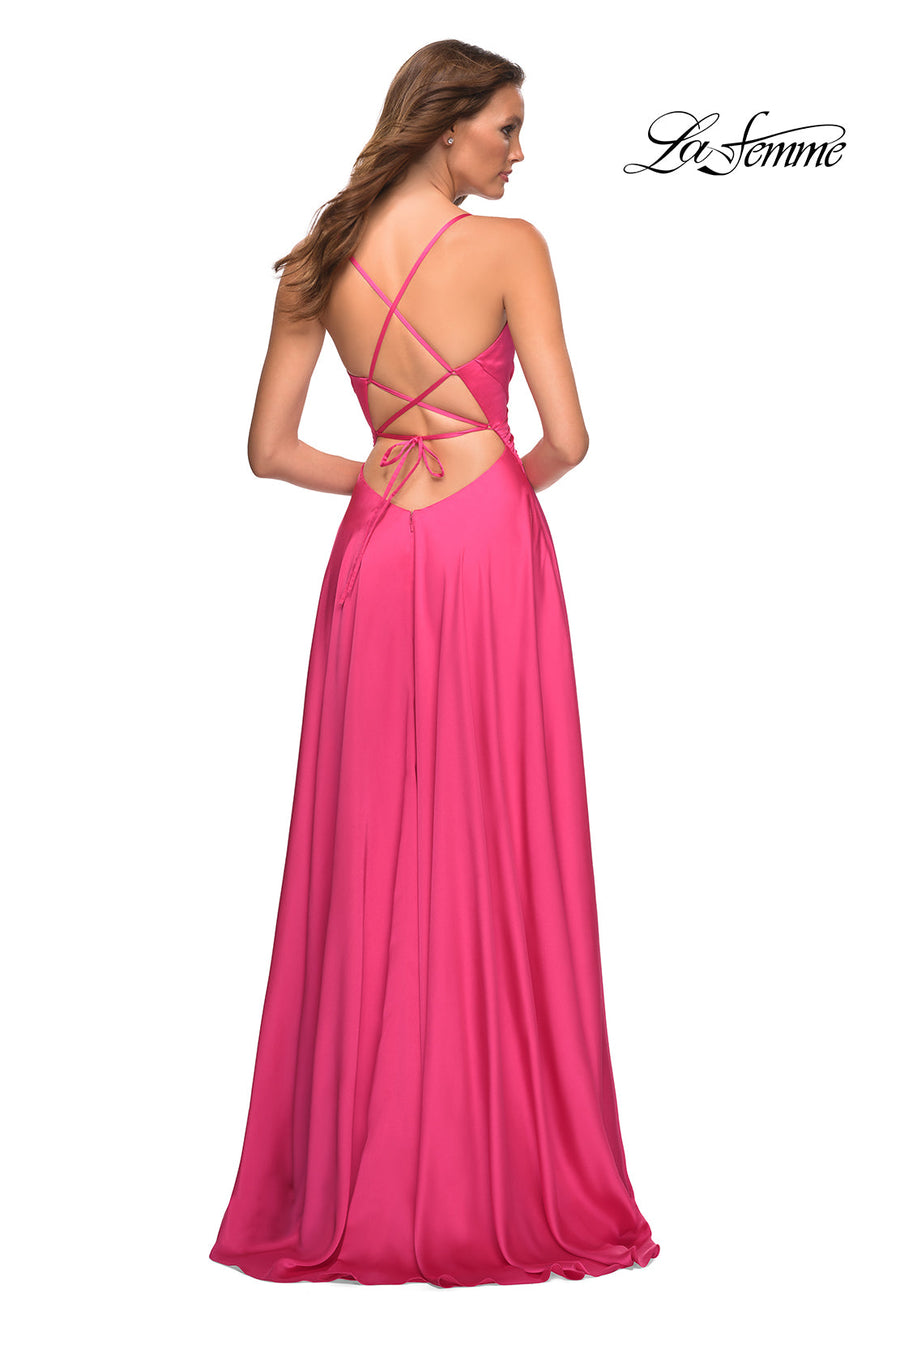 La Femme 30616 prom dress images.  La Femme 30616 is available in these colors: Hot Pink.